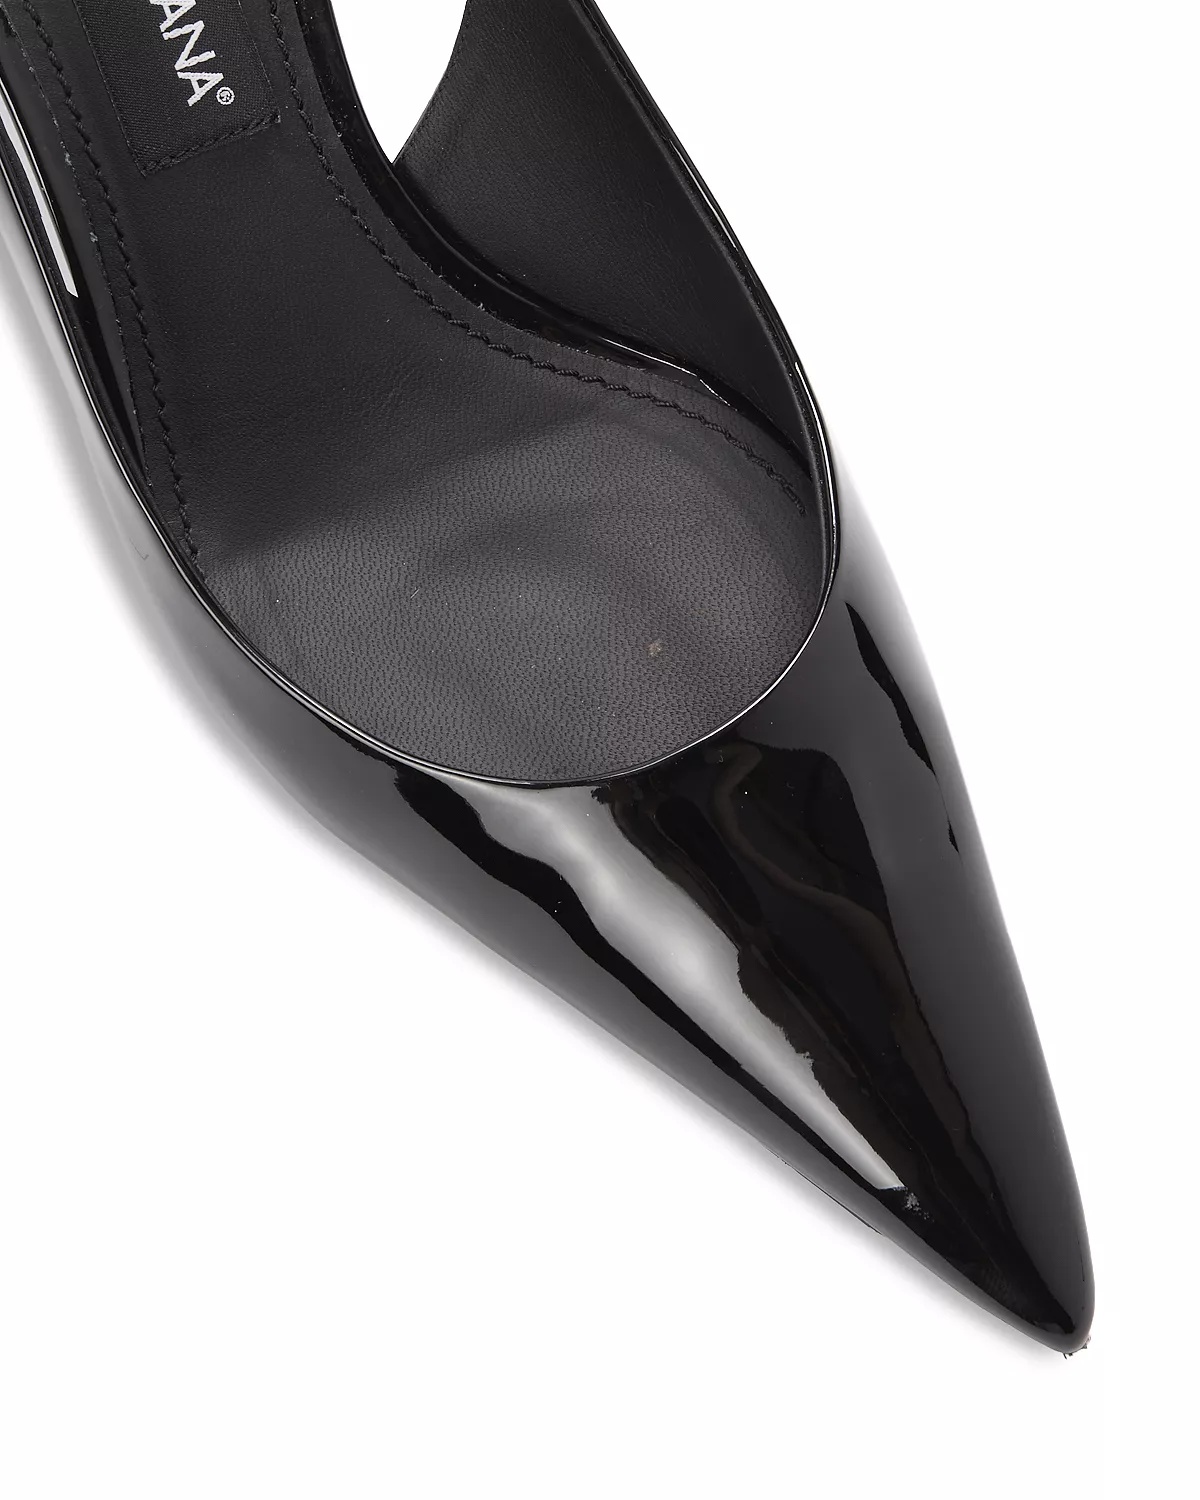 Women's Glossy Pointed Toe Slingback Pumps - 6